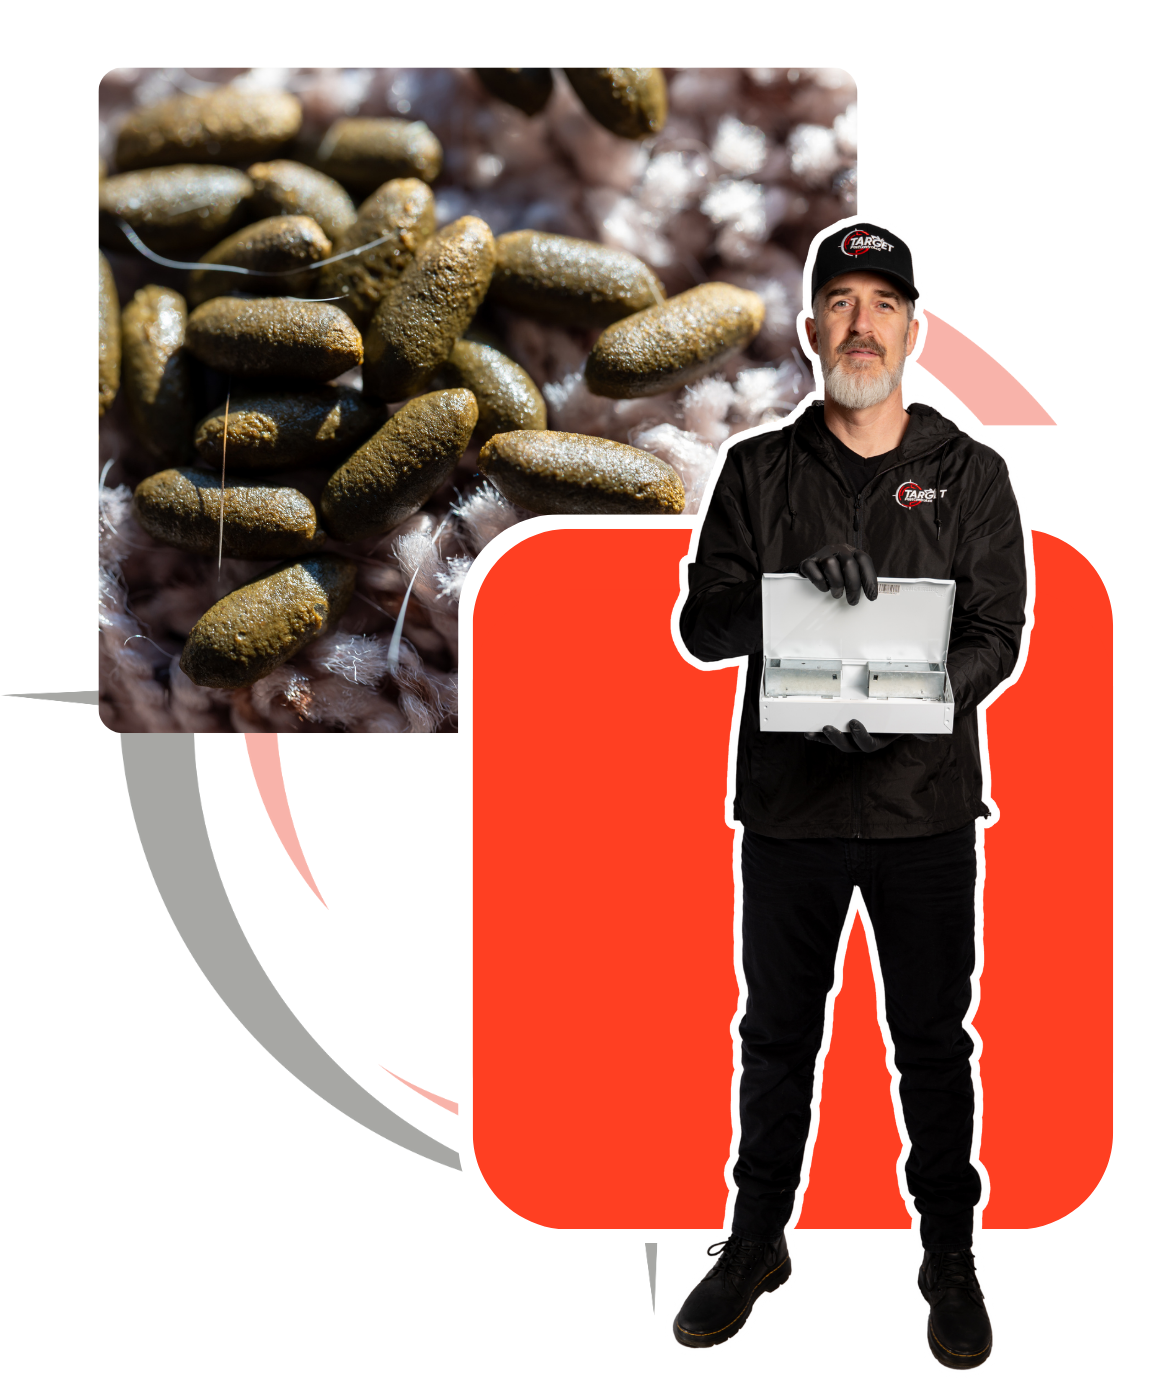 A man is holding a metal rodent trap (box) with a picture of mouse poop behind him